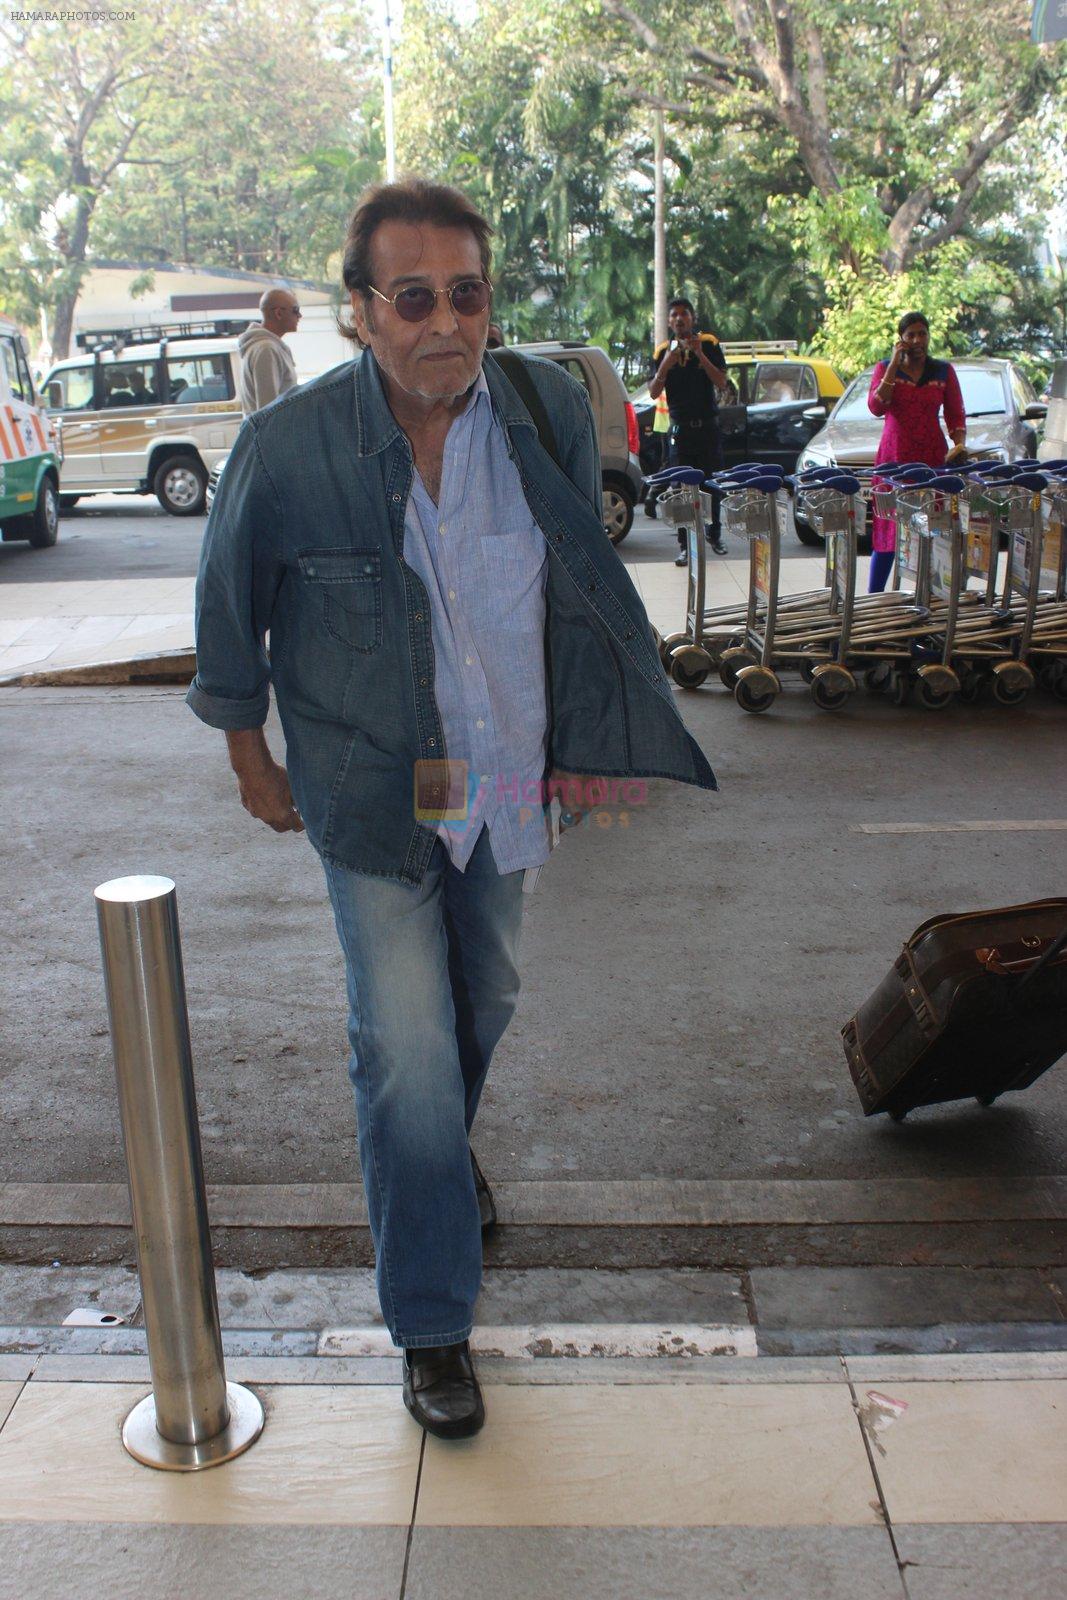 Vinod Khanna snapped at airport on 9th Feb 2016